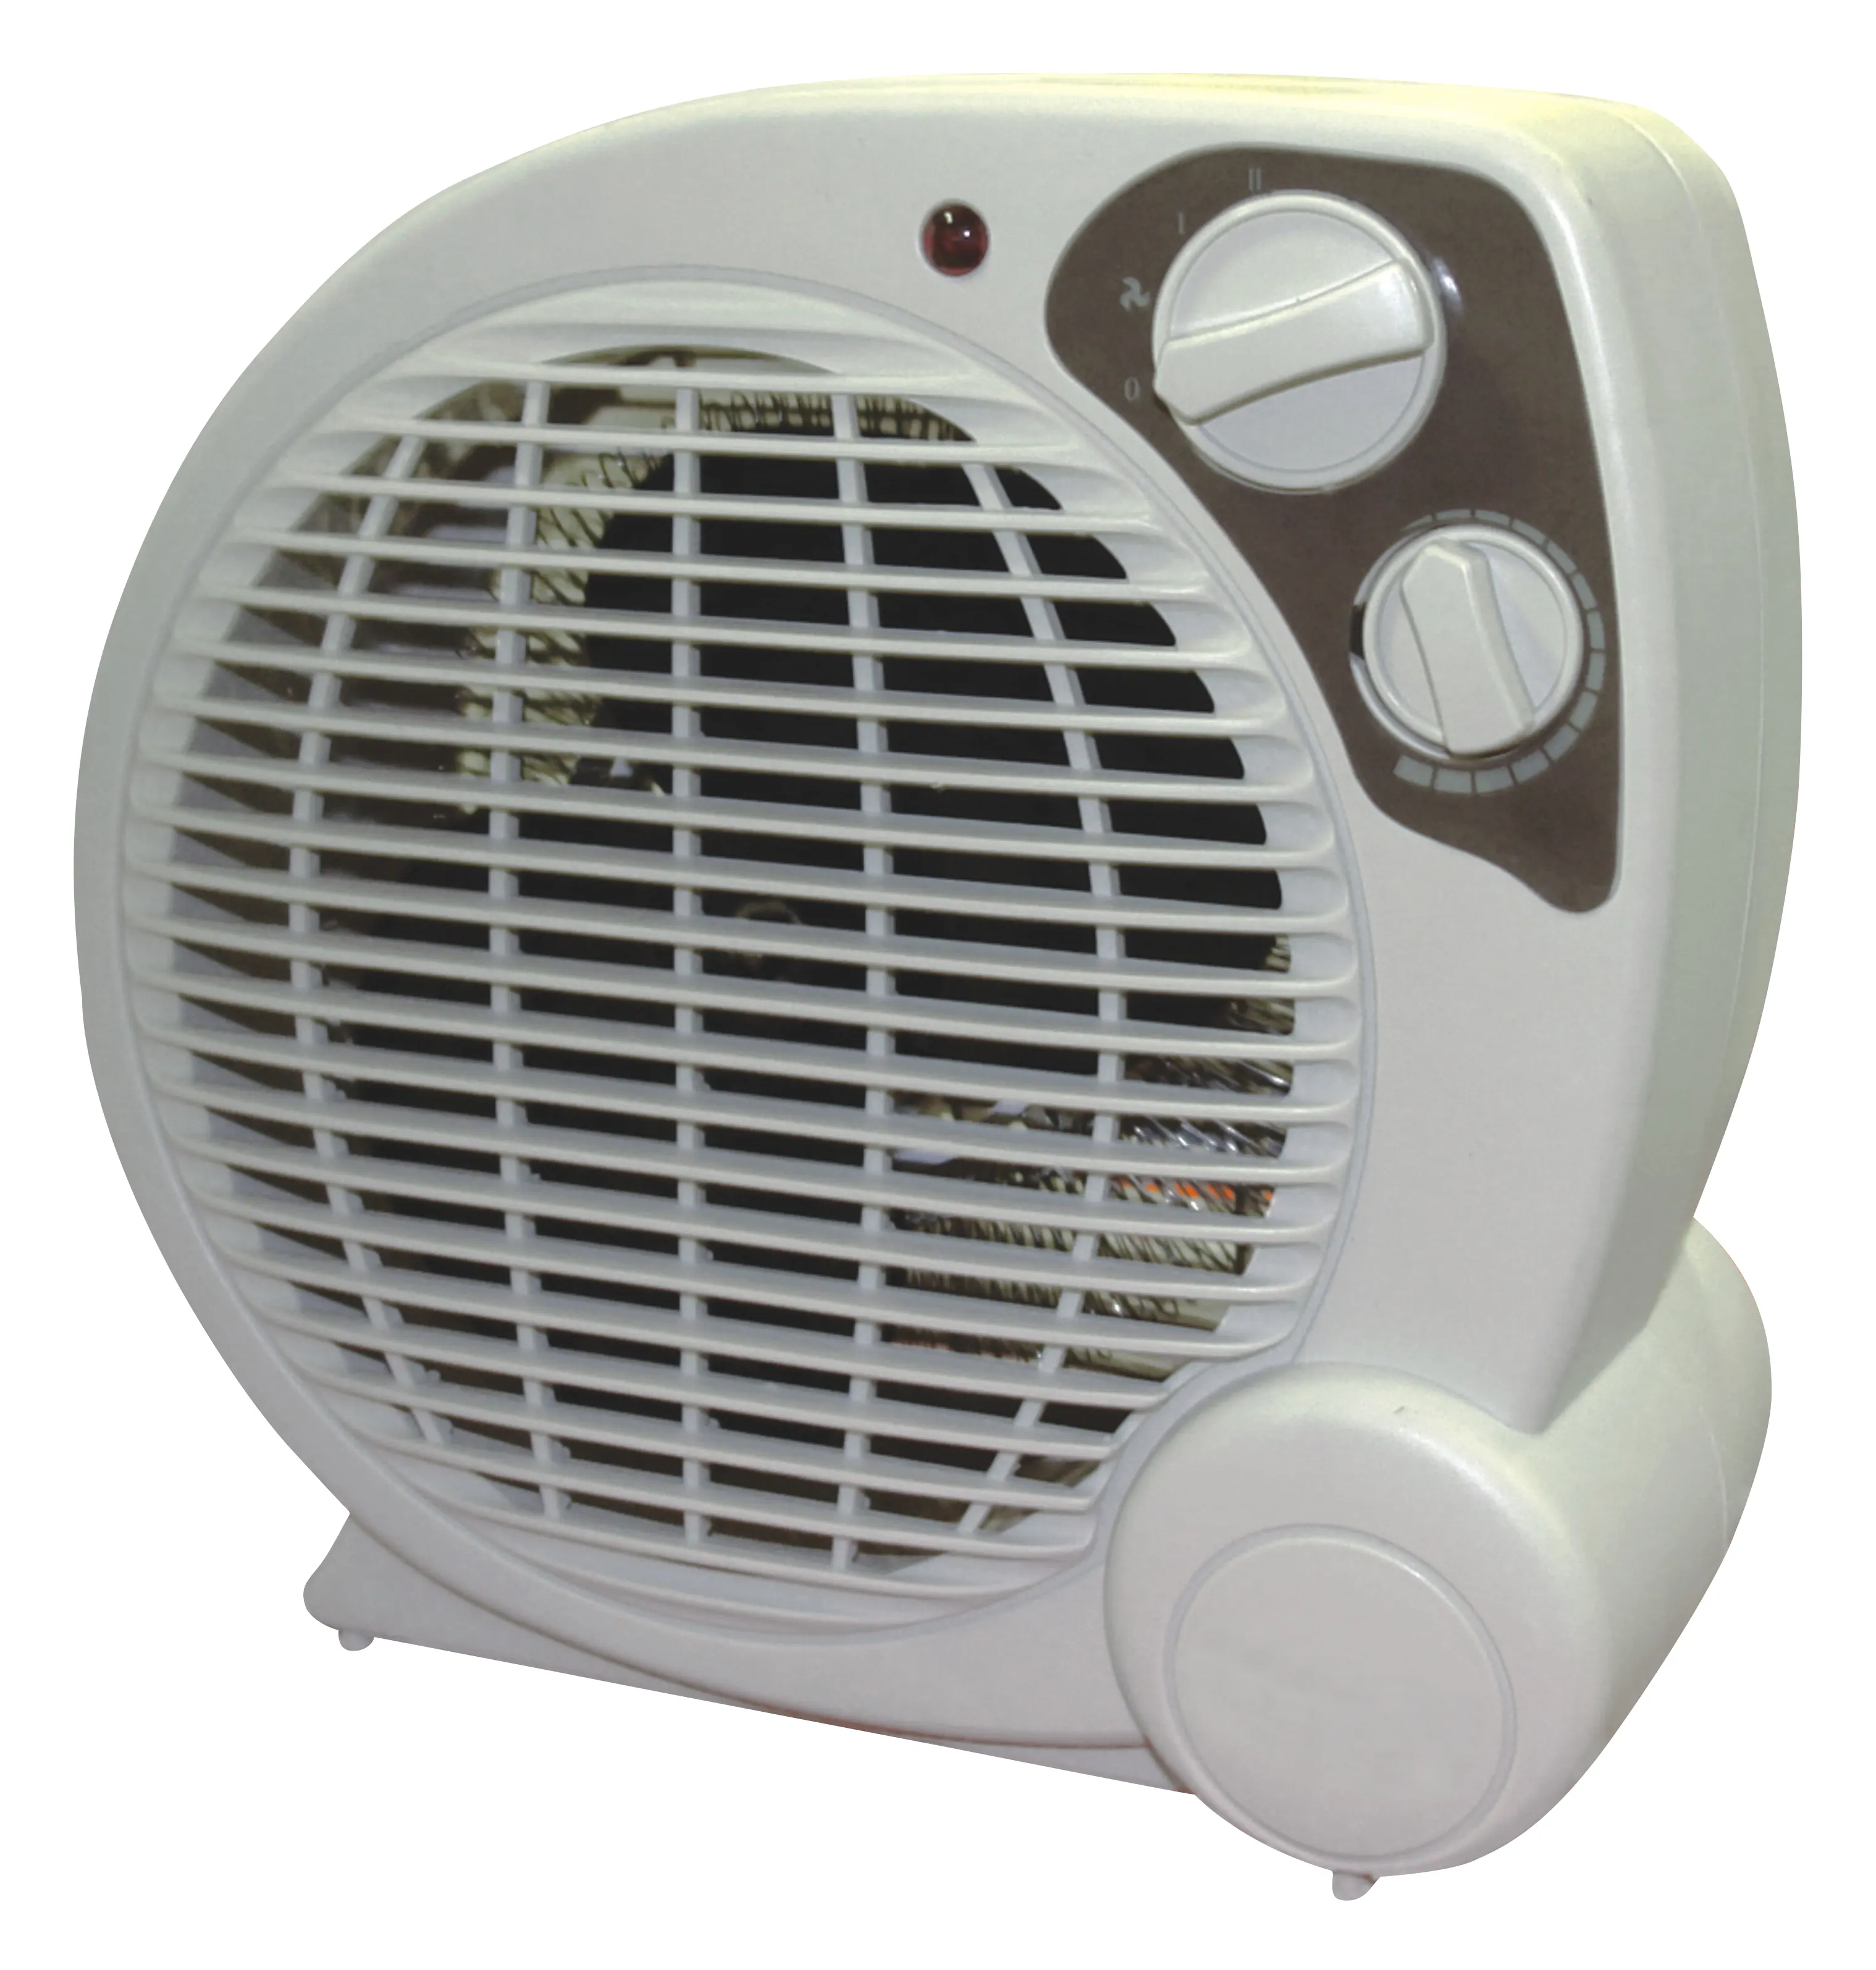 Best Selling Multi-function Desktop Mini Portable Fan Heater With Adjustable Thermostat Control